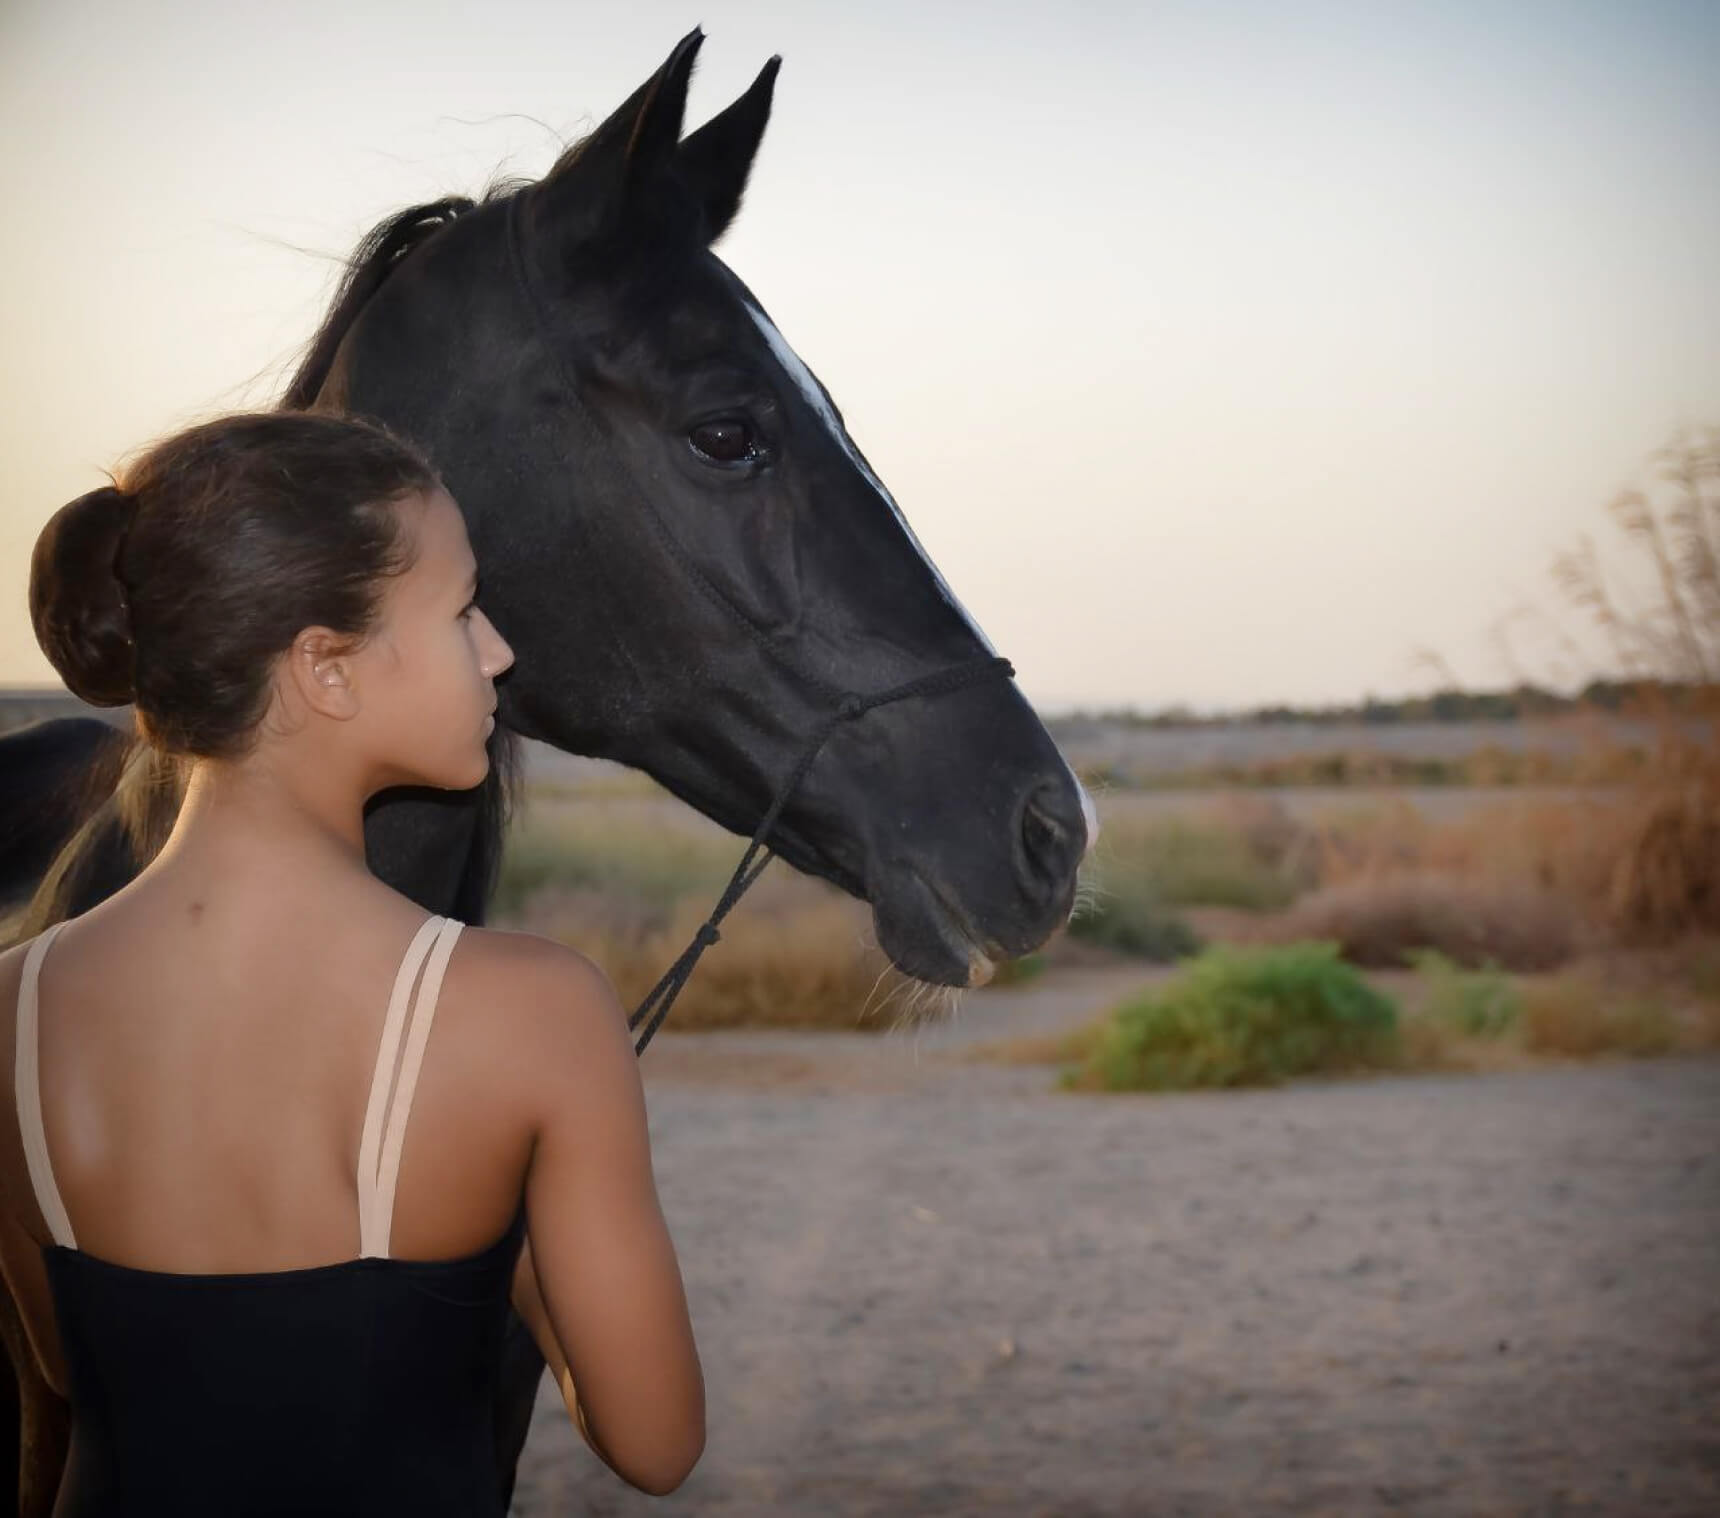 A girl with a black horse